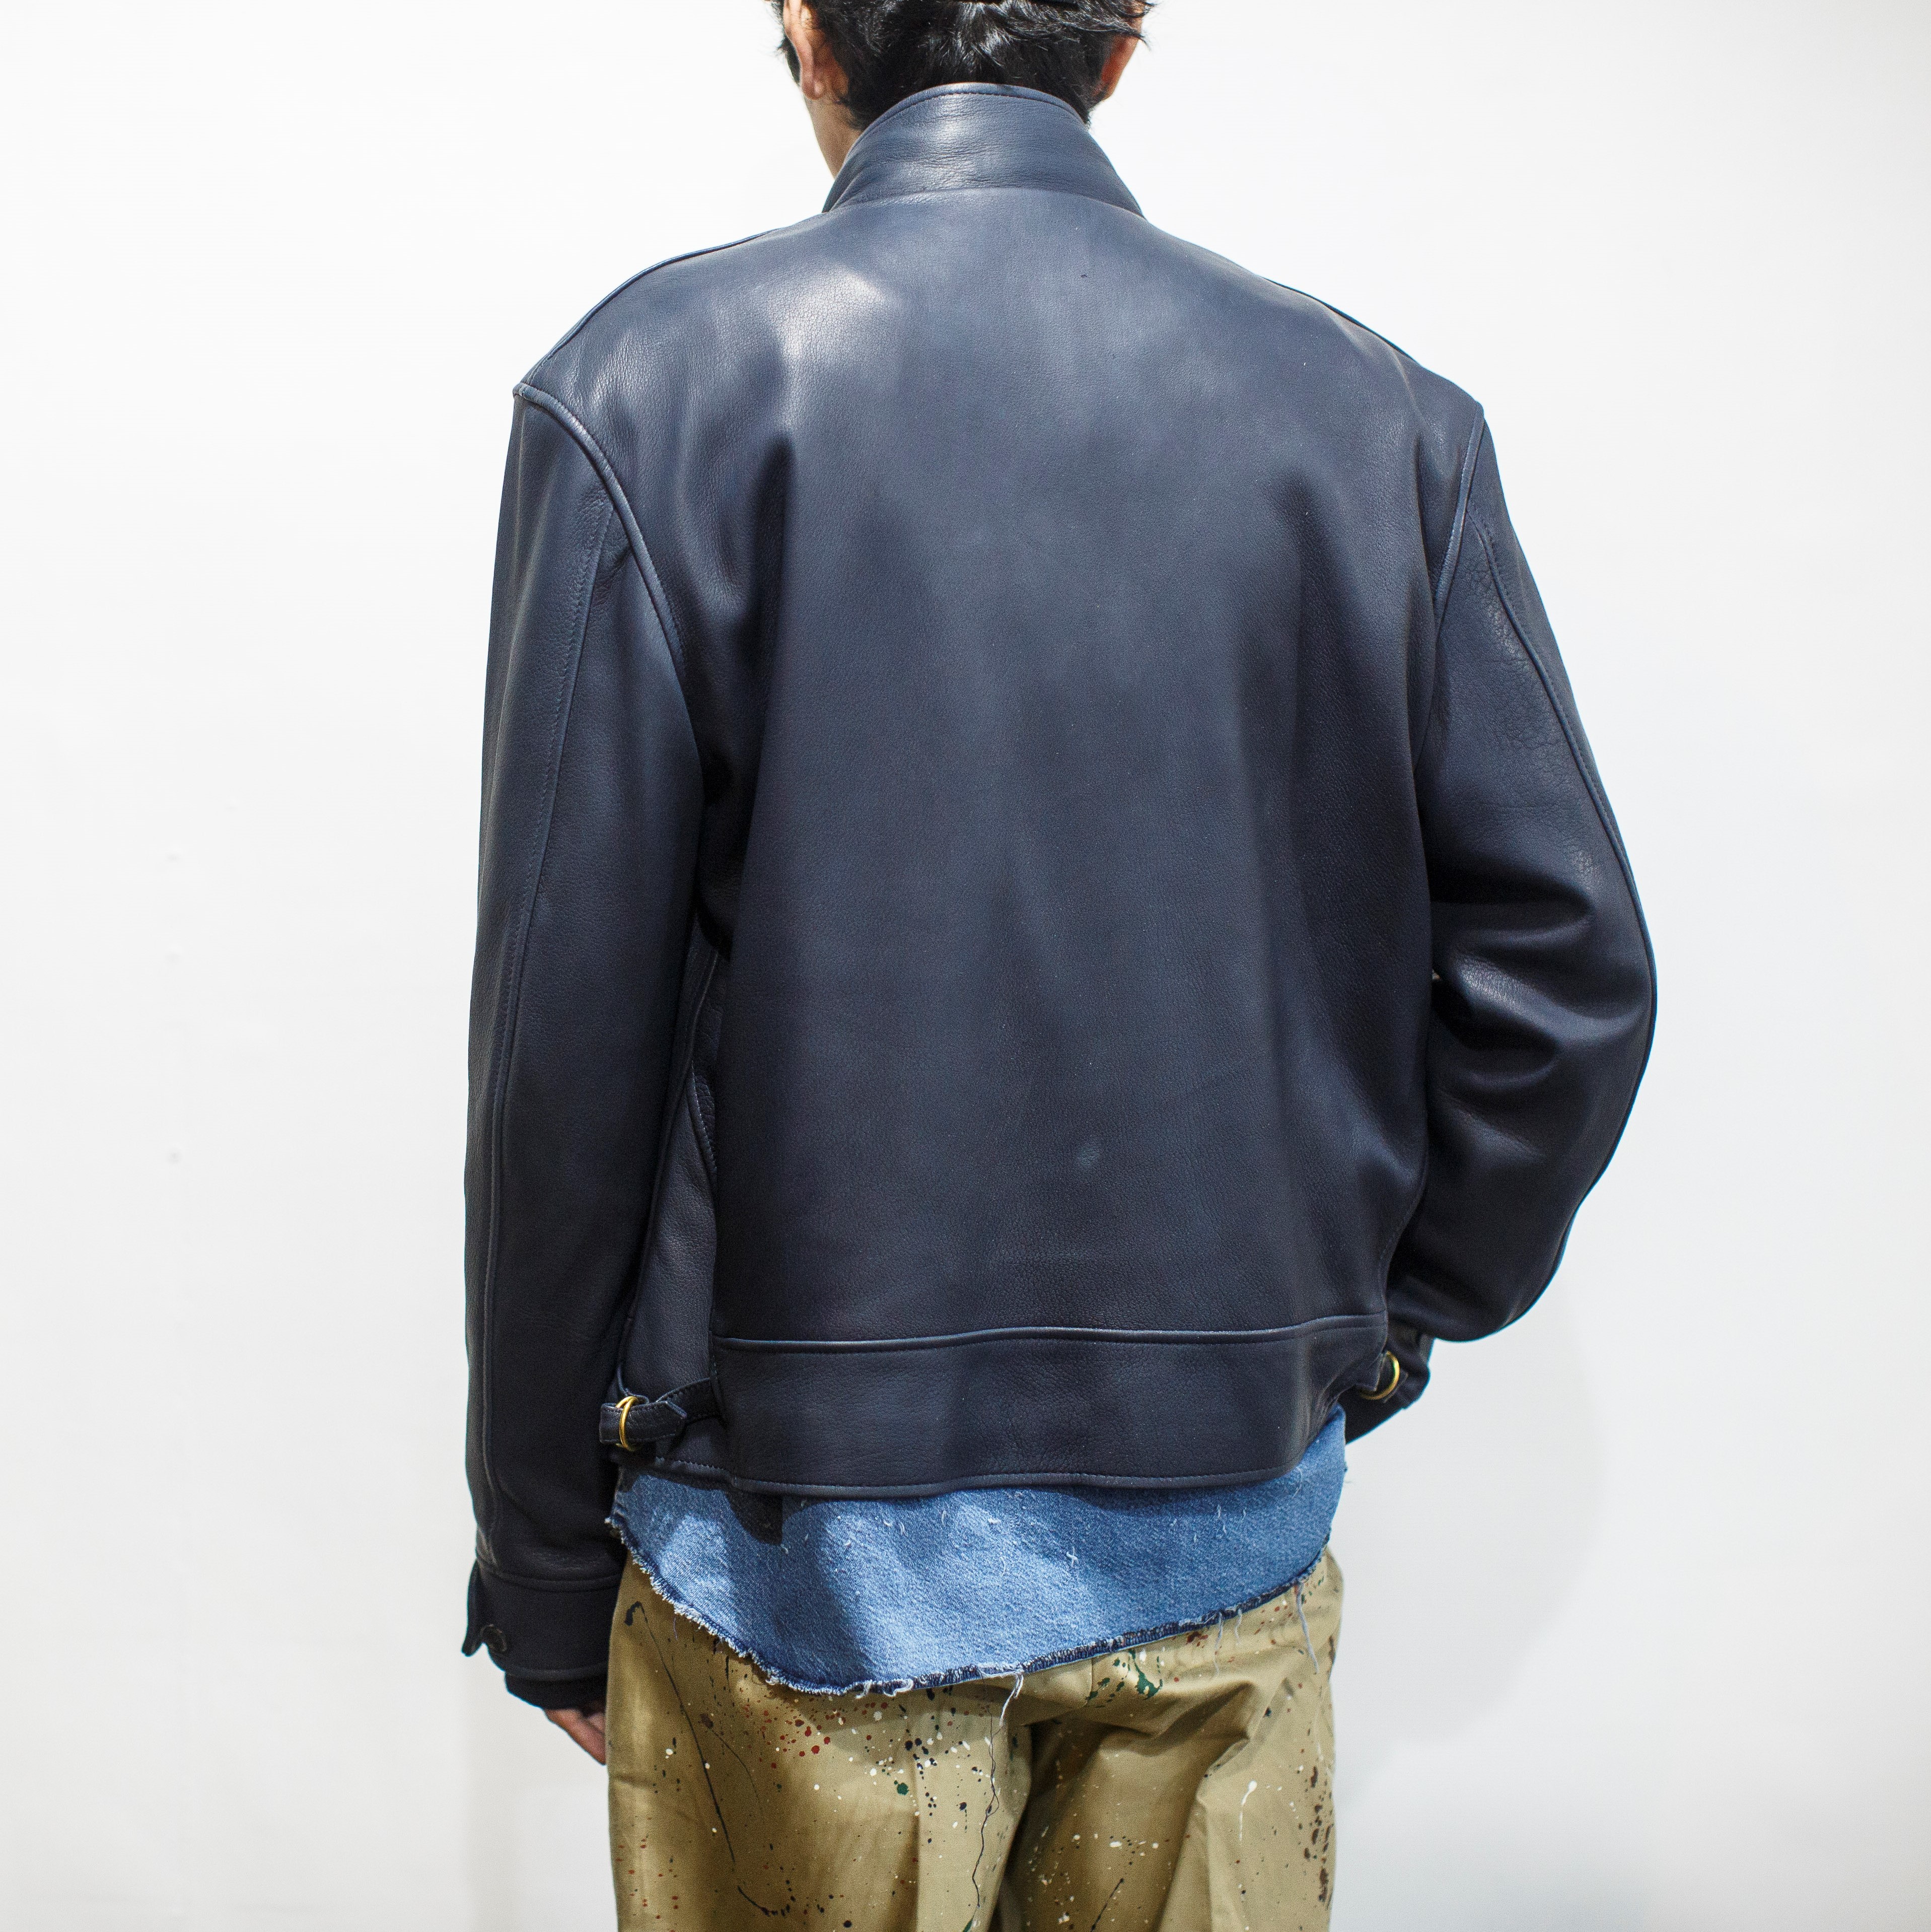 7 X 7 / SEVEN BY SEVEN ( セブン バイ セブン ) LEATHER SPORT JACKET -NAVY